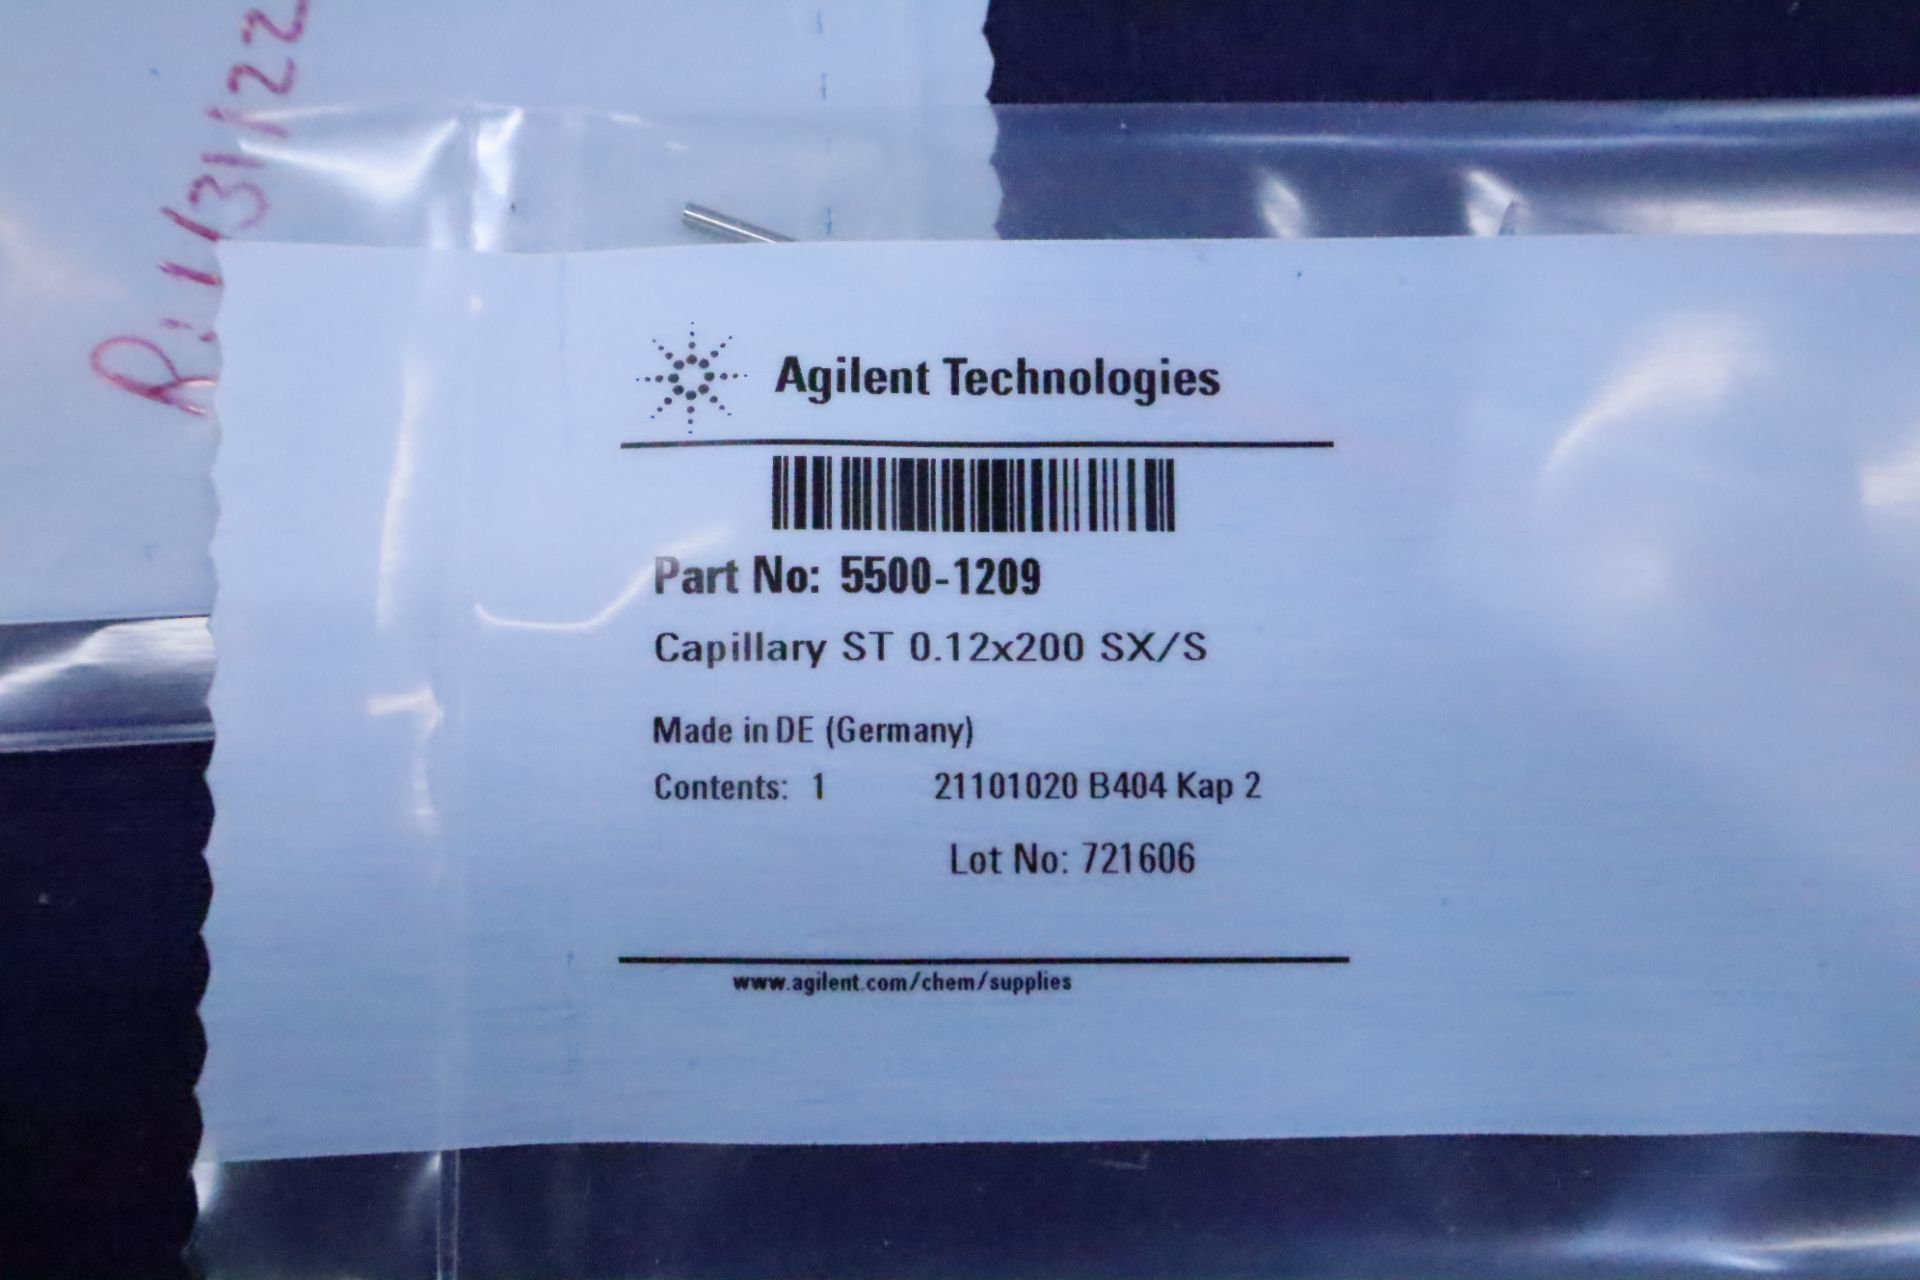 (NIB) Agilent Technologies OEM Replacement Parts for LC/MS Machines - Image 23 of 28